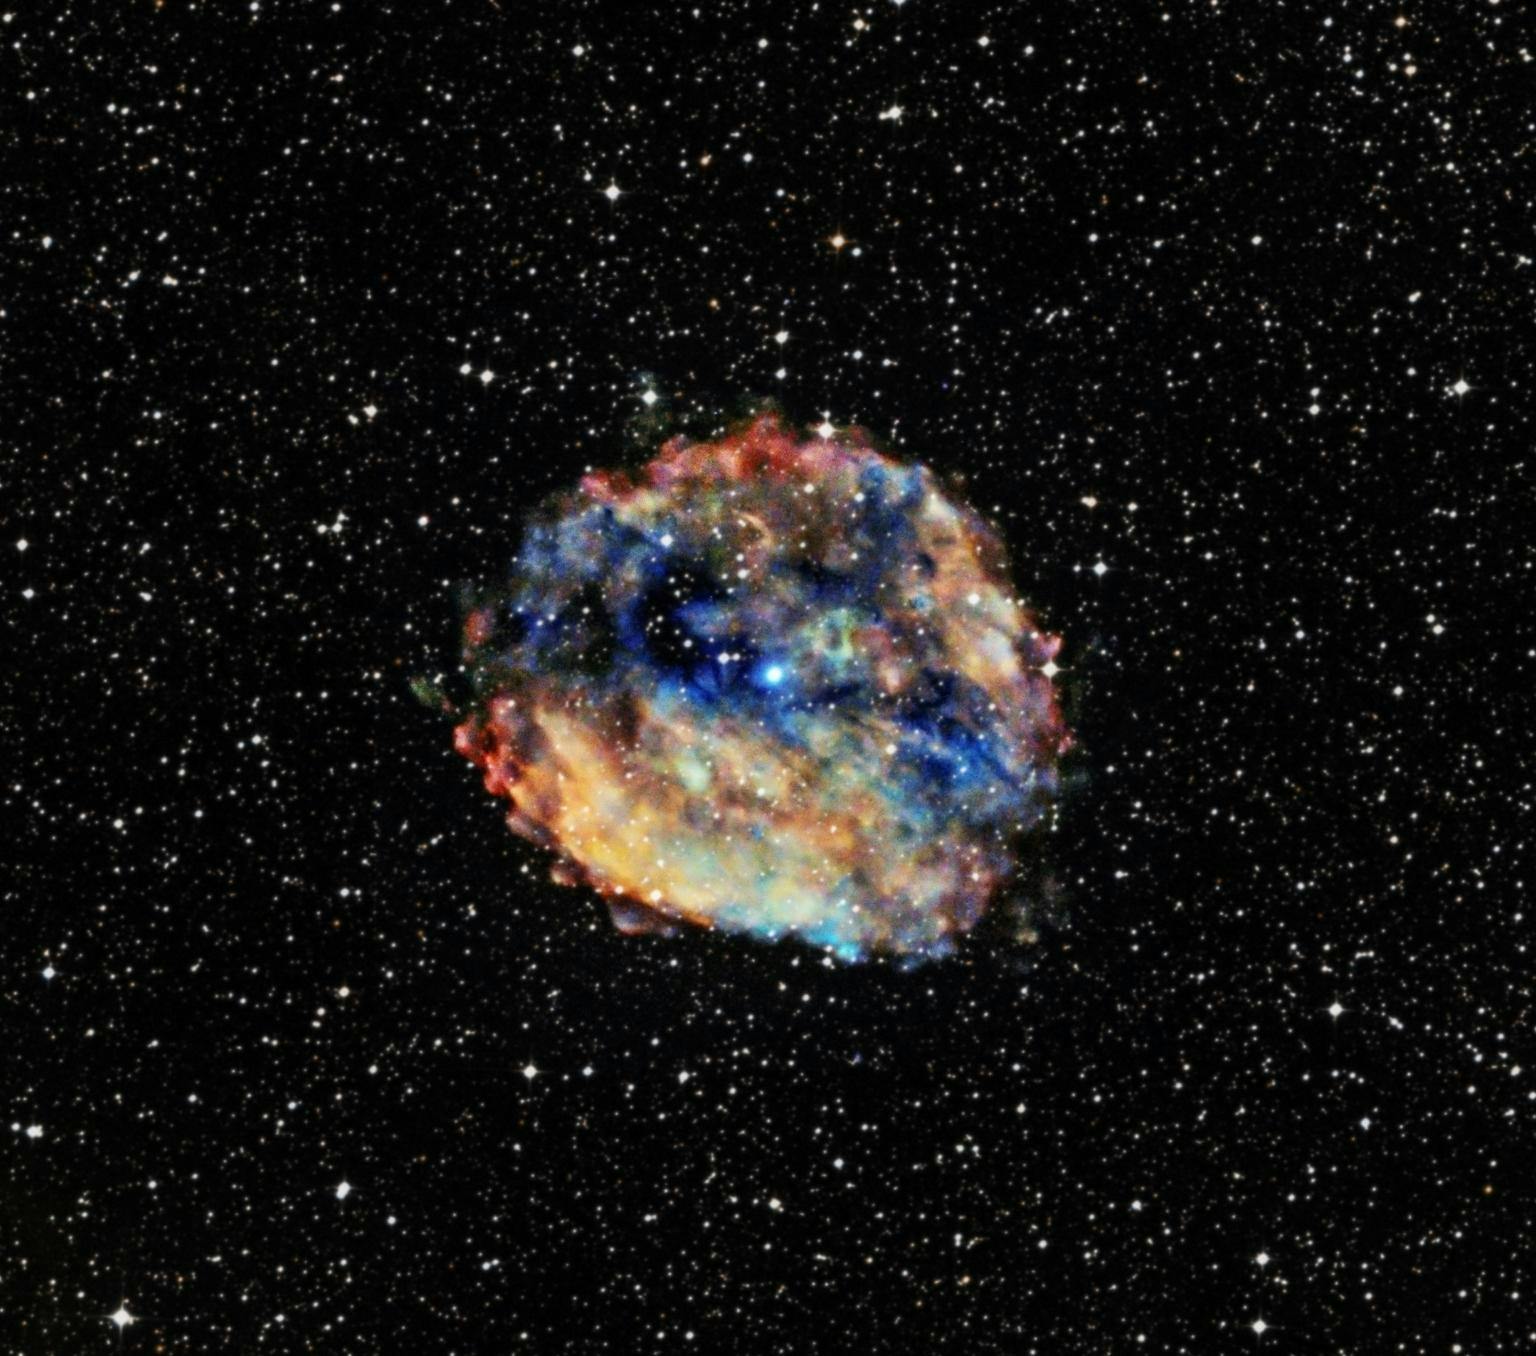 image of a cloud of colourful patche sof colour in a dark starry sky